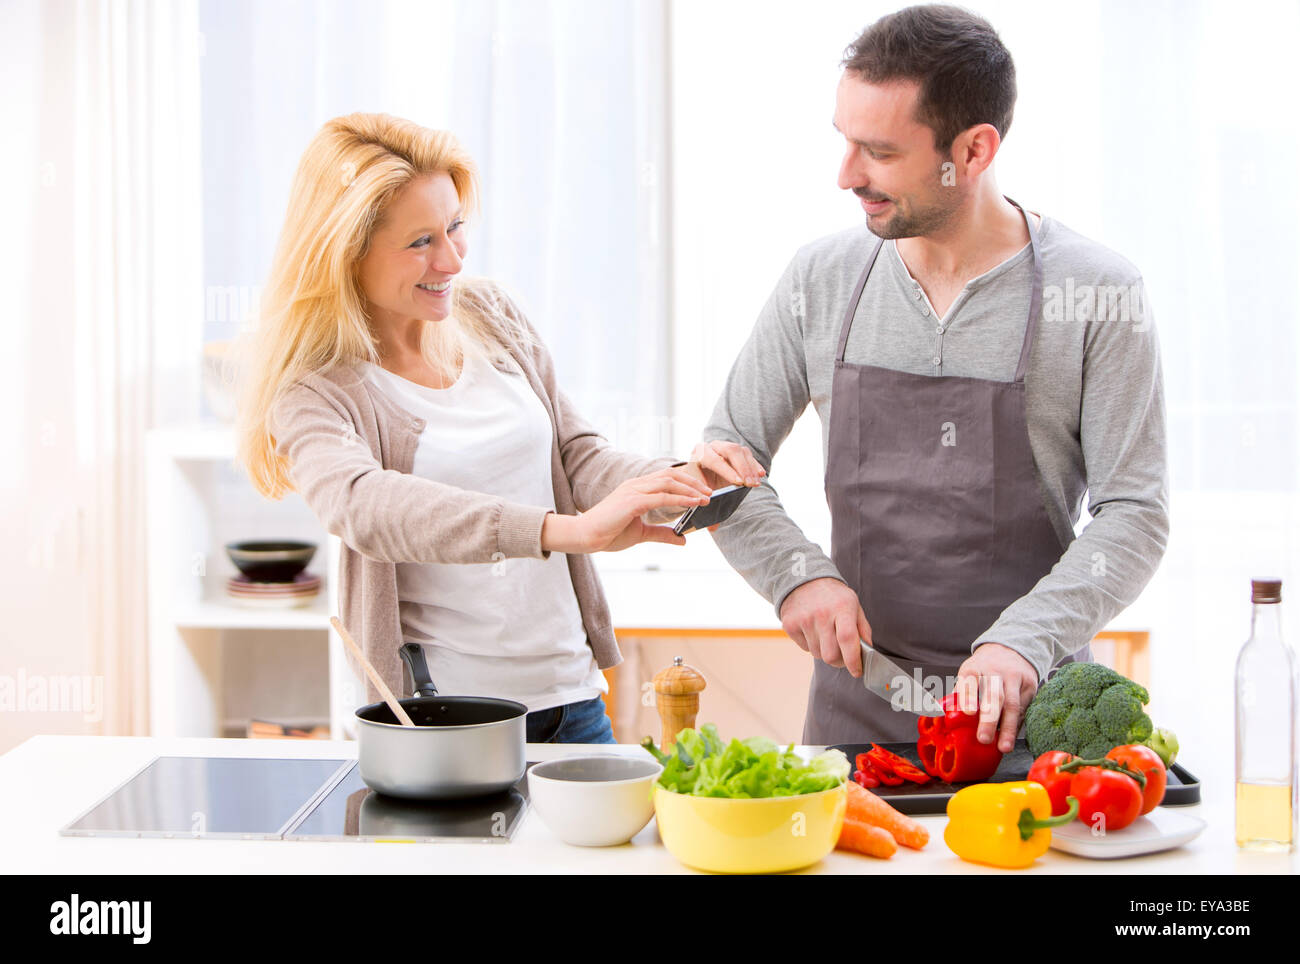 View of a Young attractive woman taking picture in kitchen Stock Photo